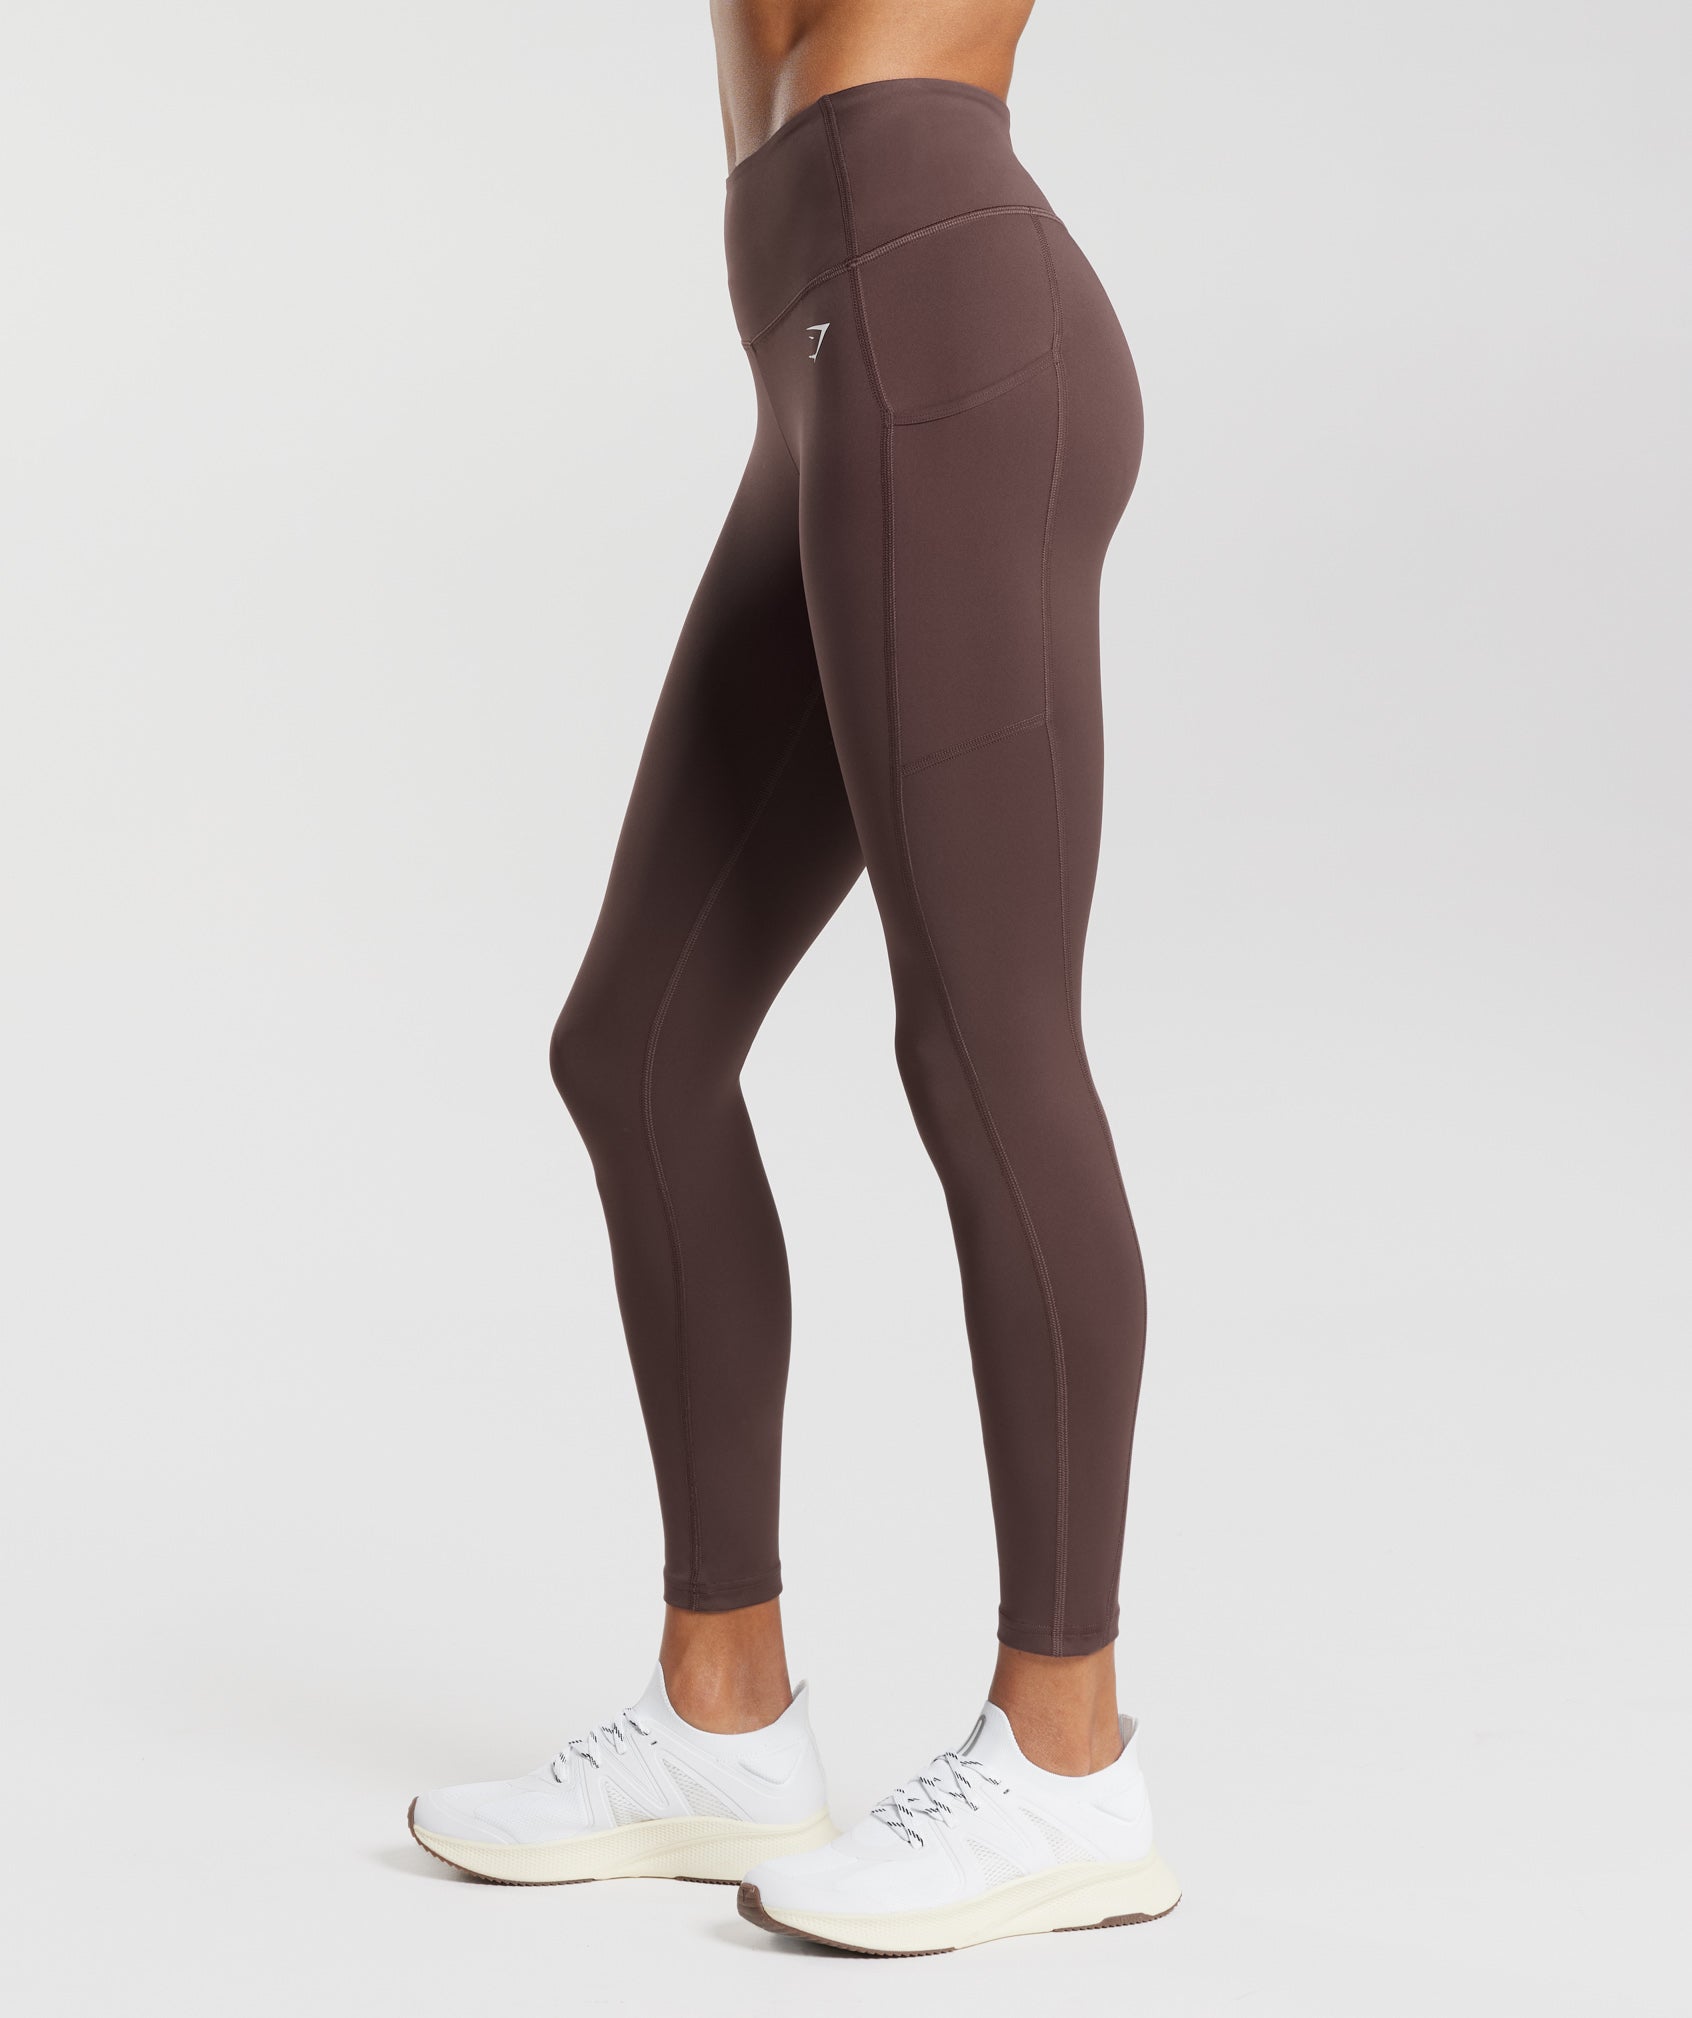 Brown Tights For Women